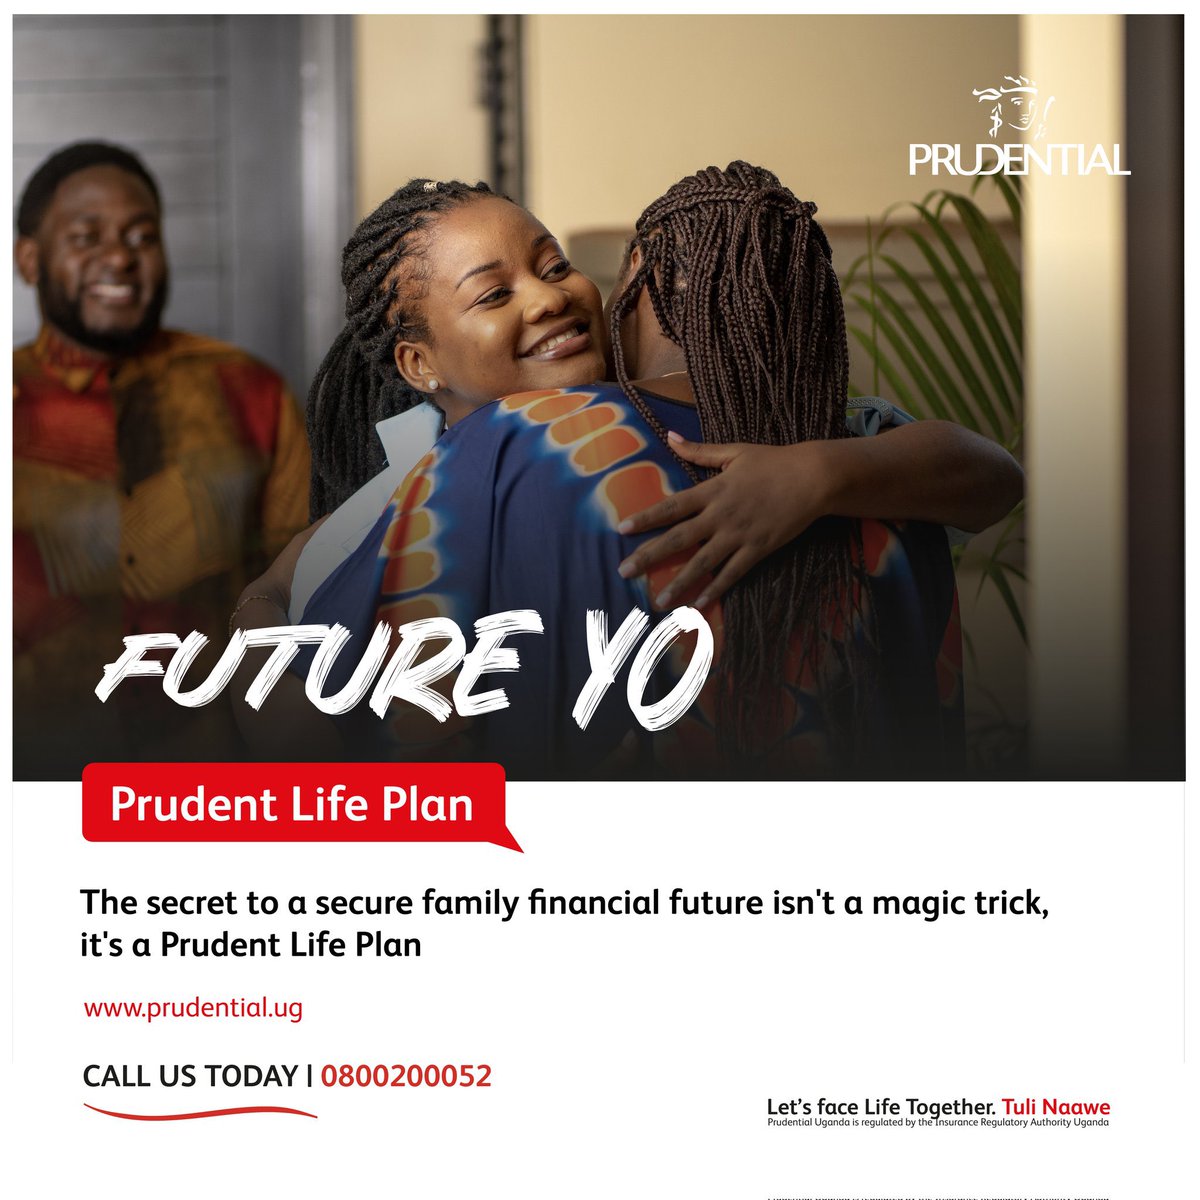 You don’t need to worry about any future financial uncertainty because the Prudent life plan guarantees you and your family financial security amidst it all. Learn all about this plan by reaching out to @PrudentialUG today!
#FutureYo